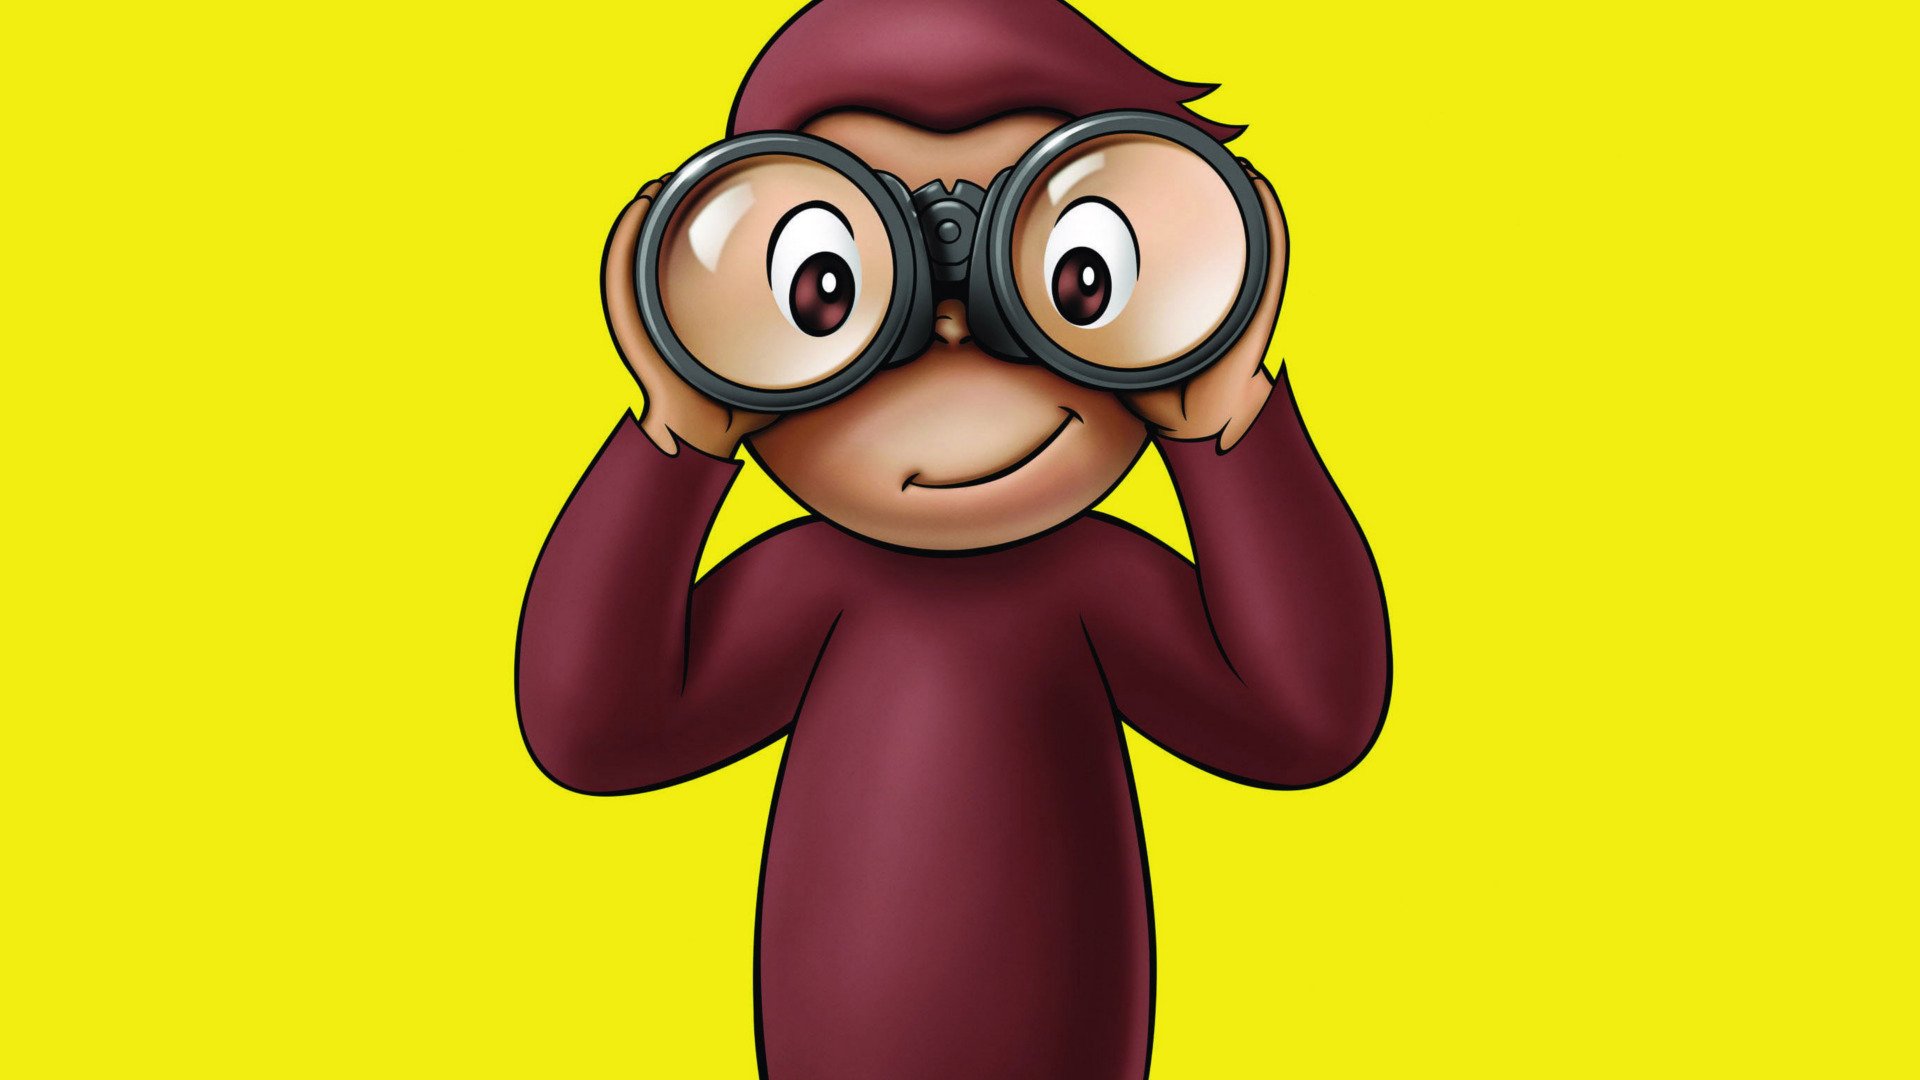 Curious George Wallpaper